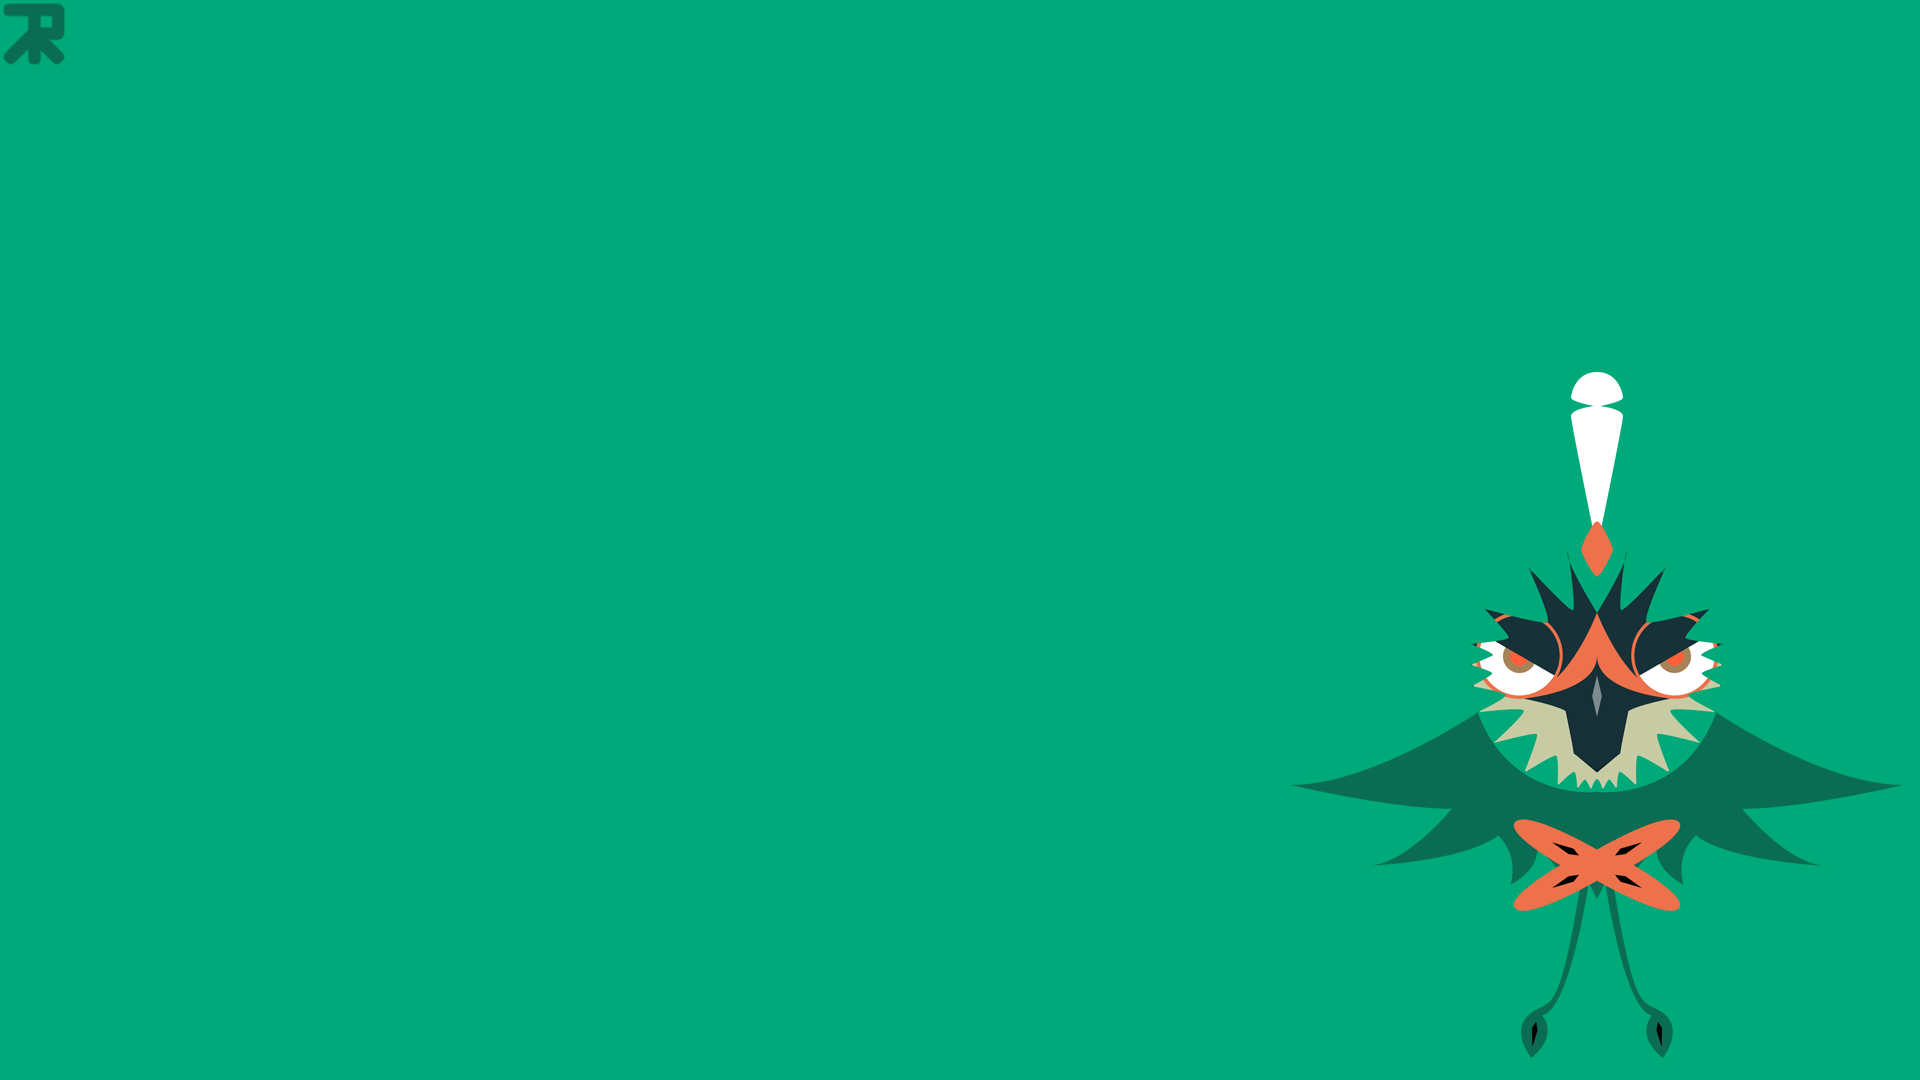 Since everybody likes Decidueye so much, i decided to make a free